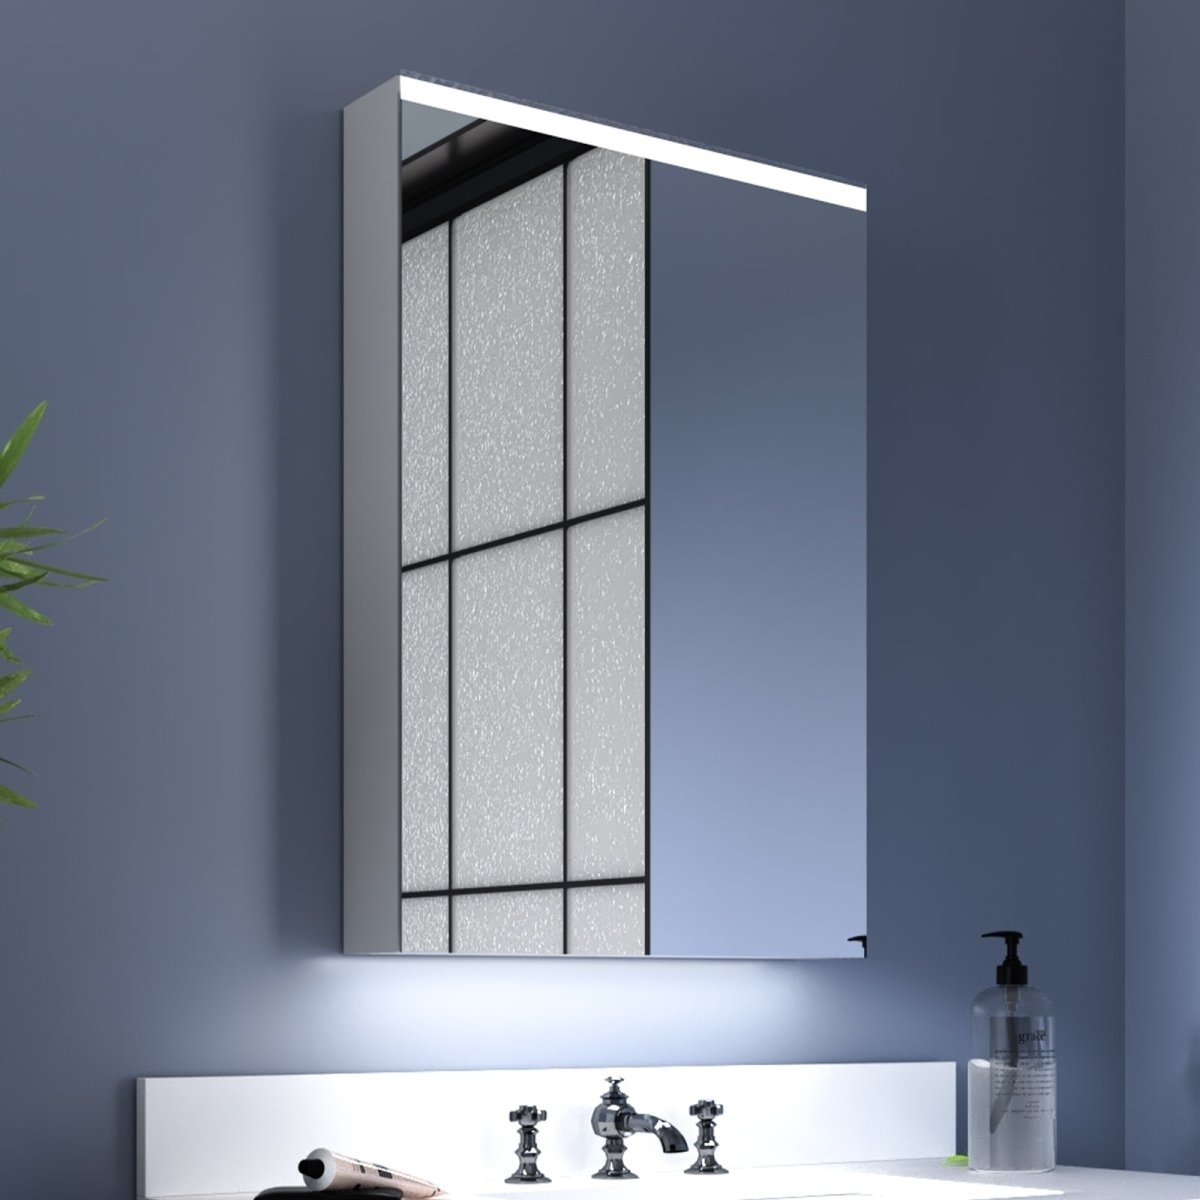 ExBrite 20''x 30'' inch LED Bathroom Led Light Medicine Cabinet with Mirrors Aluminum - Right Open